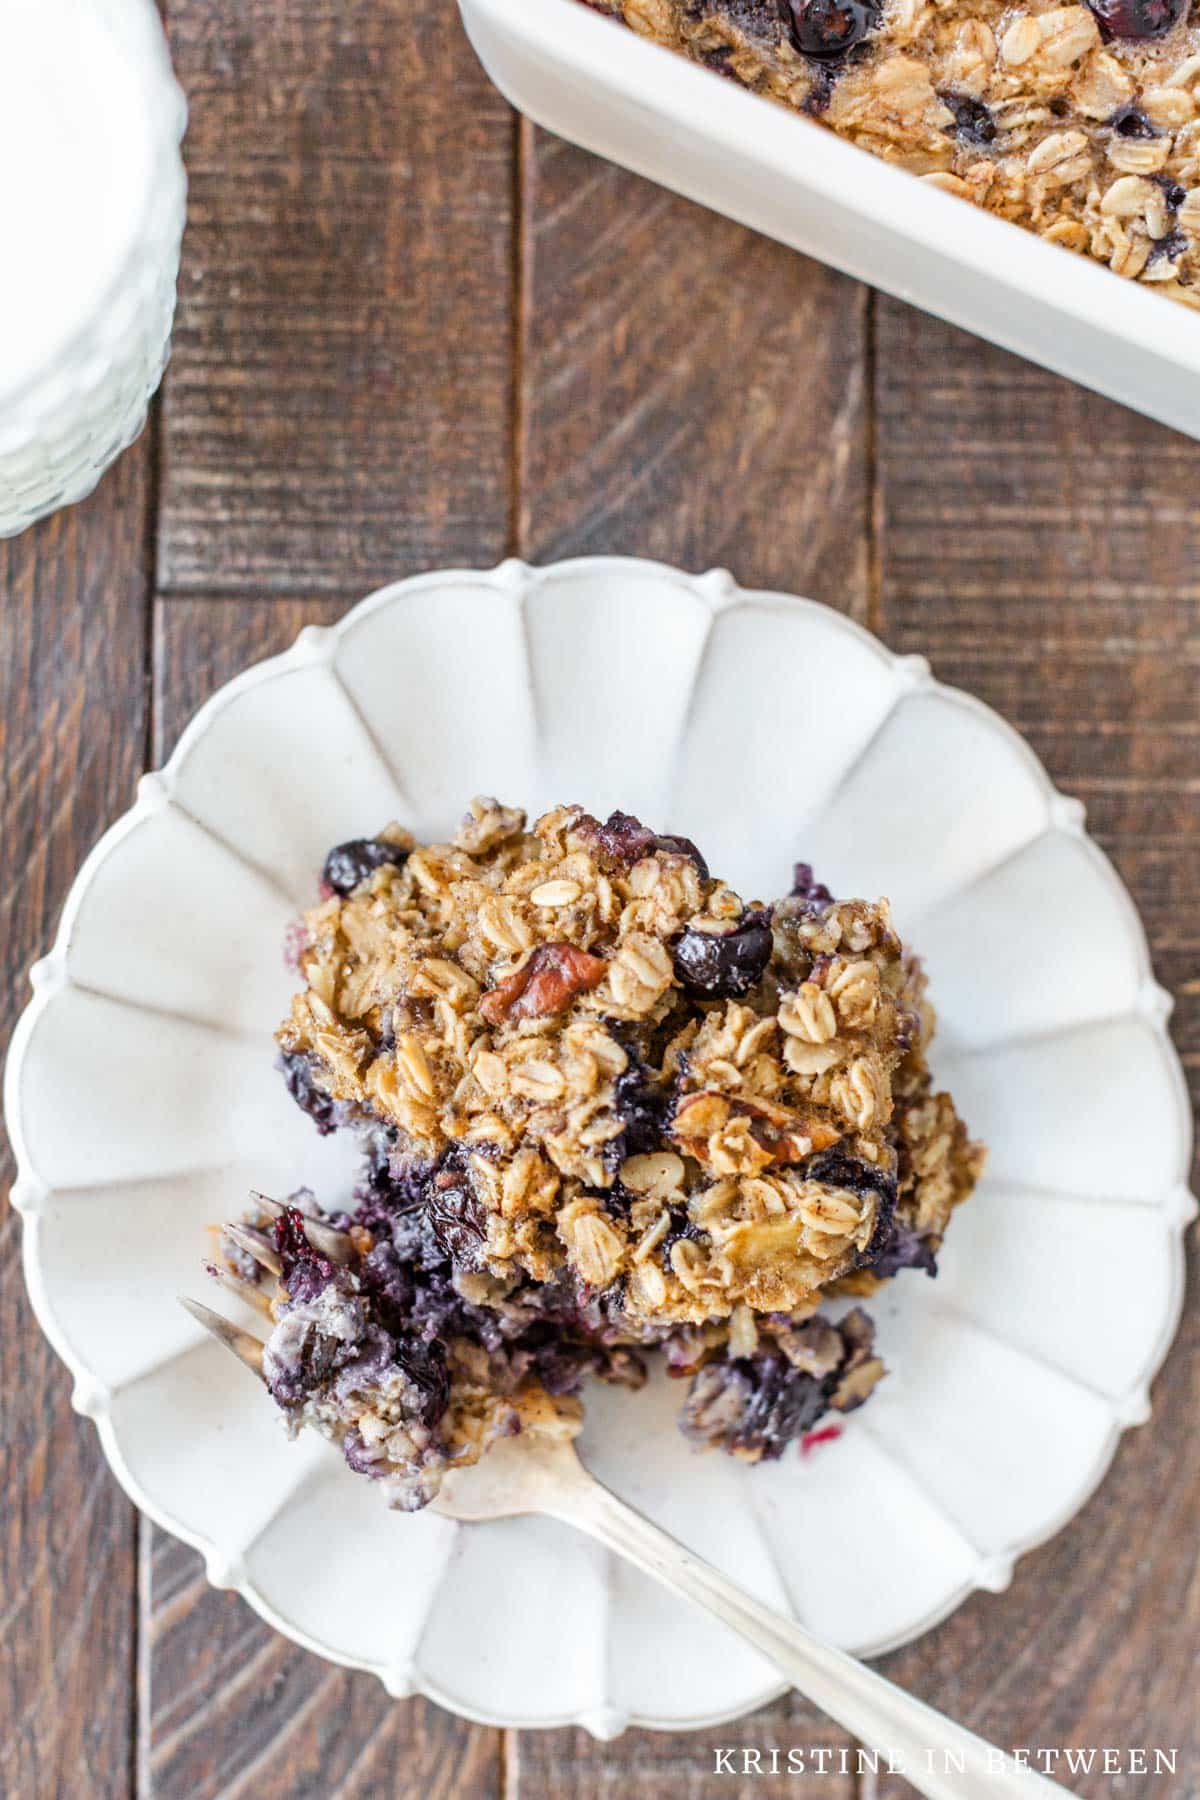 A small plate of baked blueberry oatmeal with a bite on a fork.